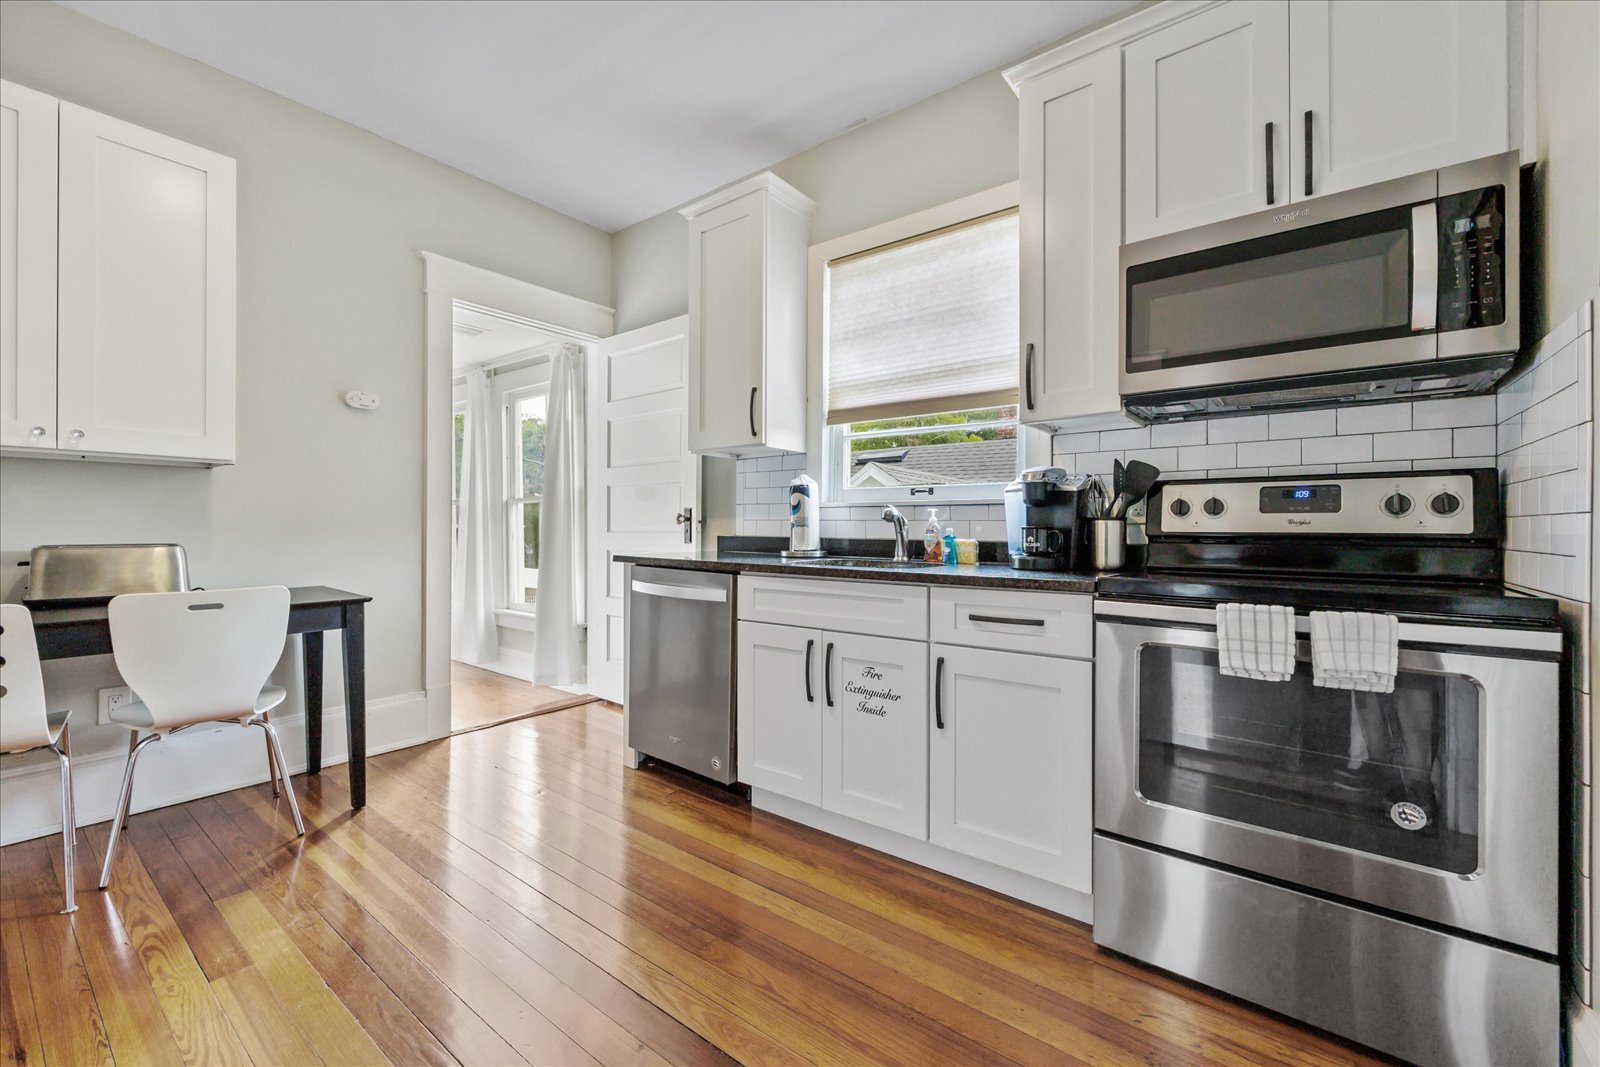 The sunny, eat-in kitchen offers wonderful amenities & ample space